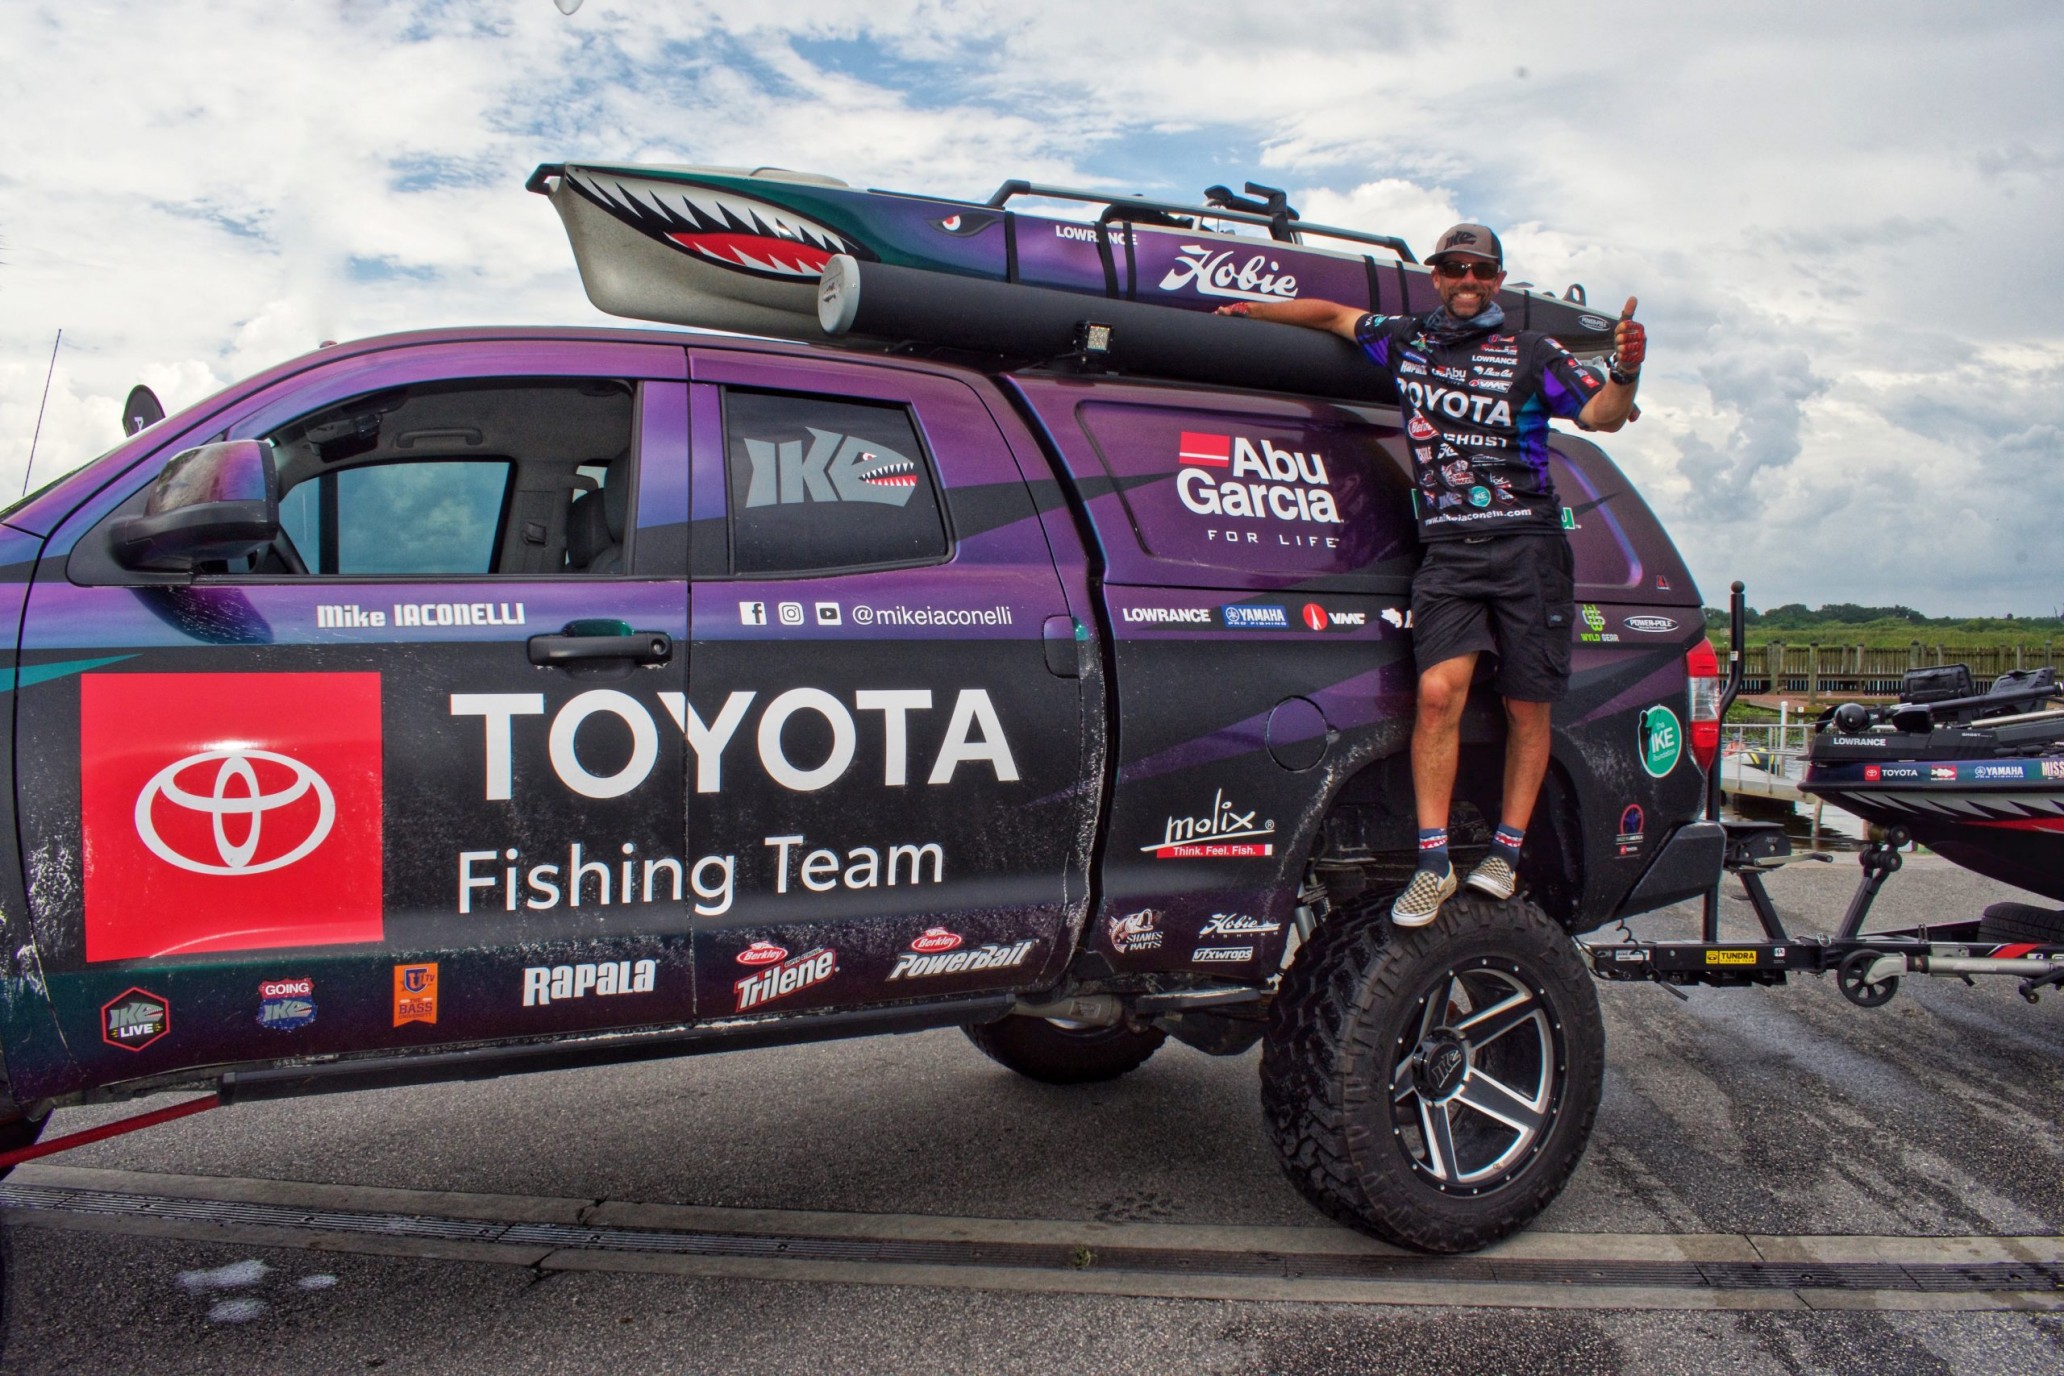 Mike Iaconelli and Morgan hit the Bass Bonanza in the cold temps